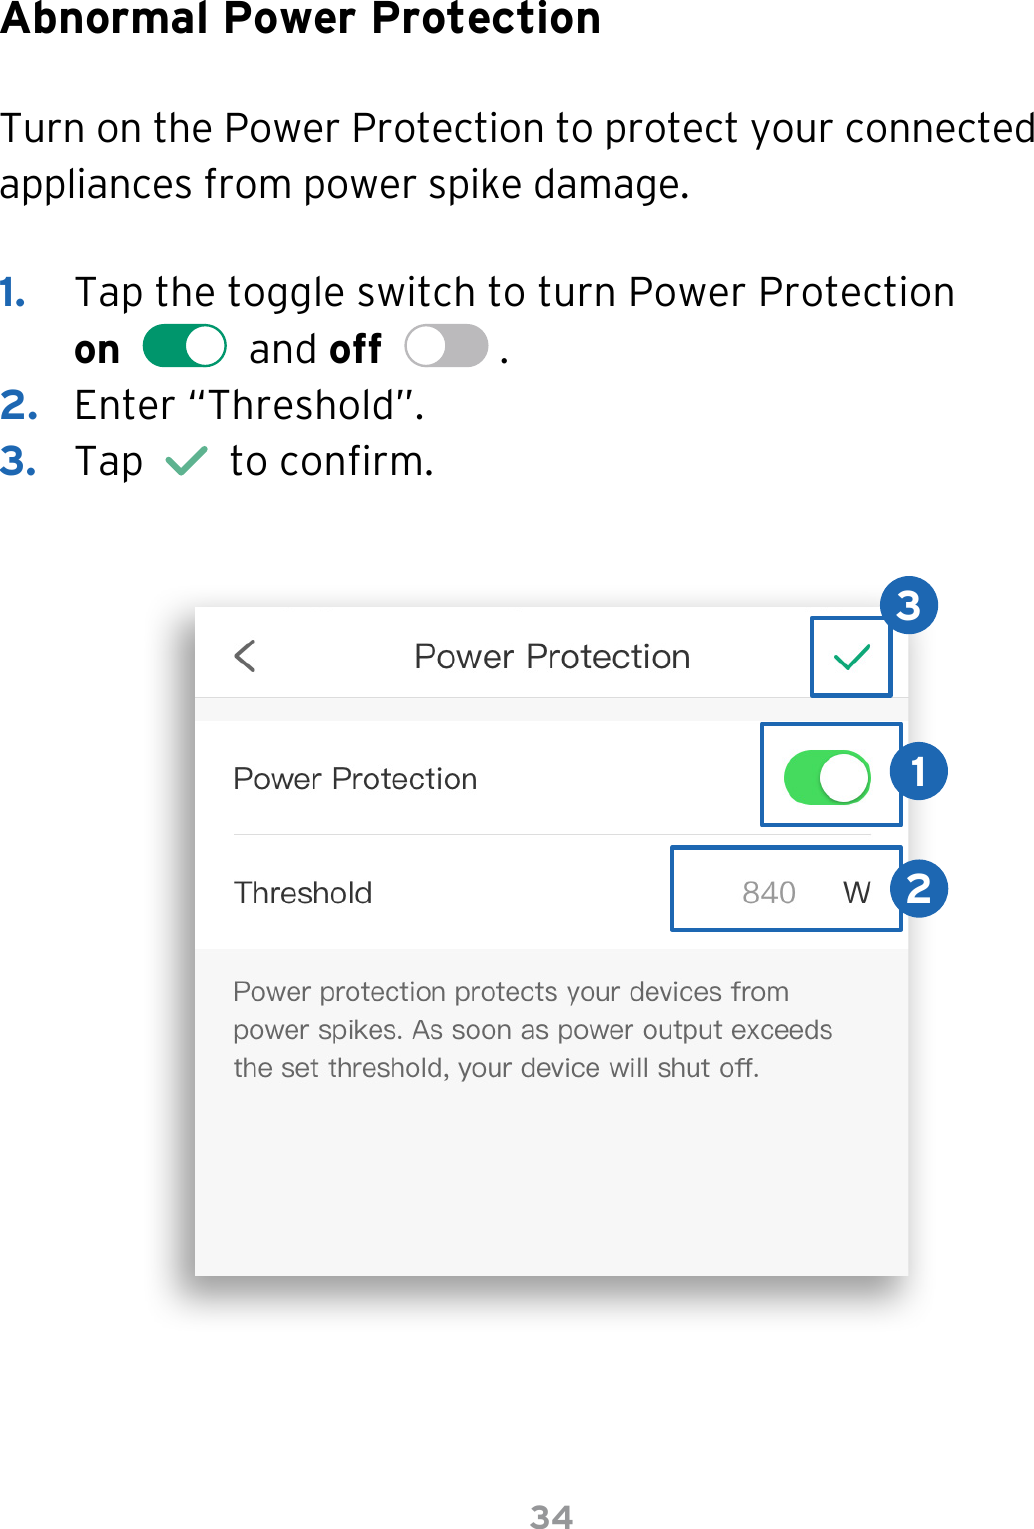 34Abnormal Power ProtectionTurn on the Power Protection to protect your connected appliances from power spike damage.1.  Tap the toggle switch to turn Power Protection  on     and off    .2.  Enter “Threshold”.3.  Tap     to conrm.123